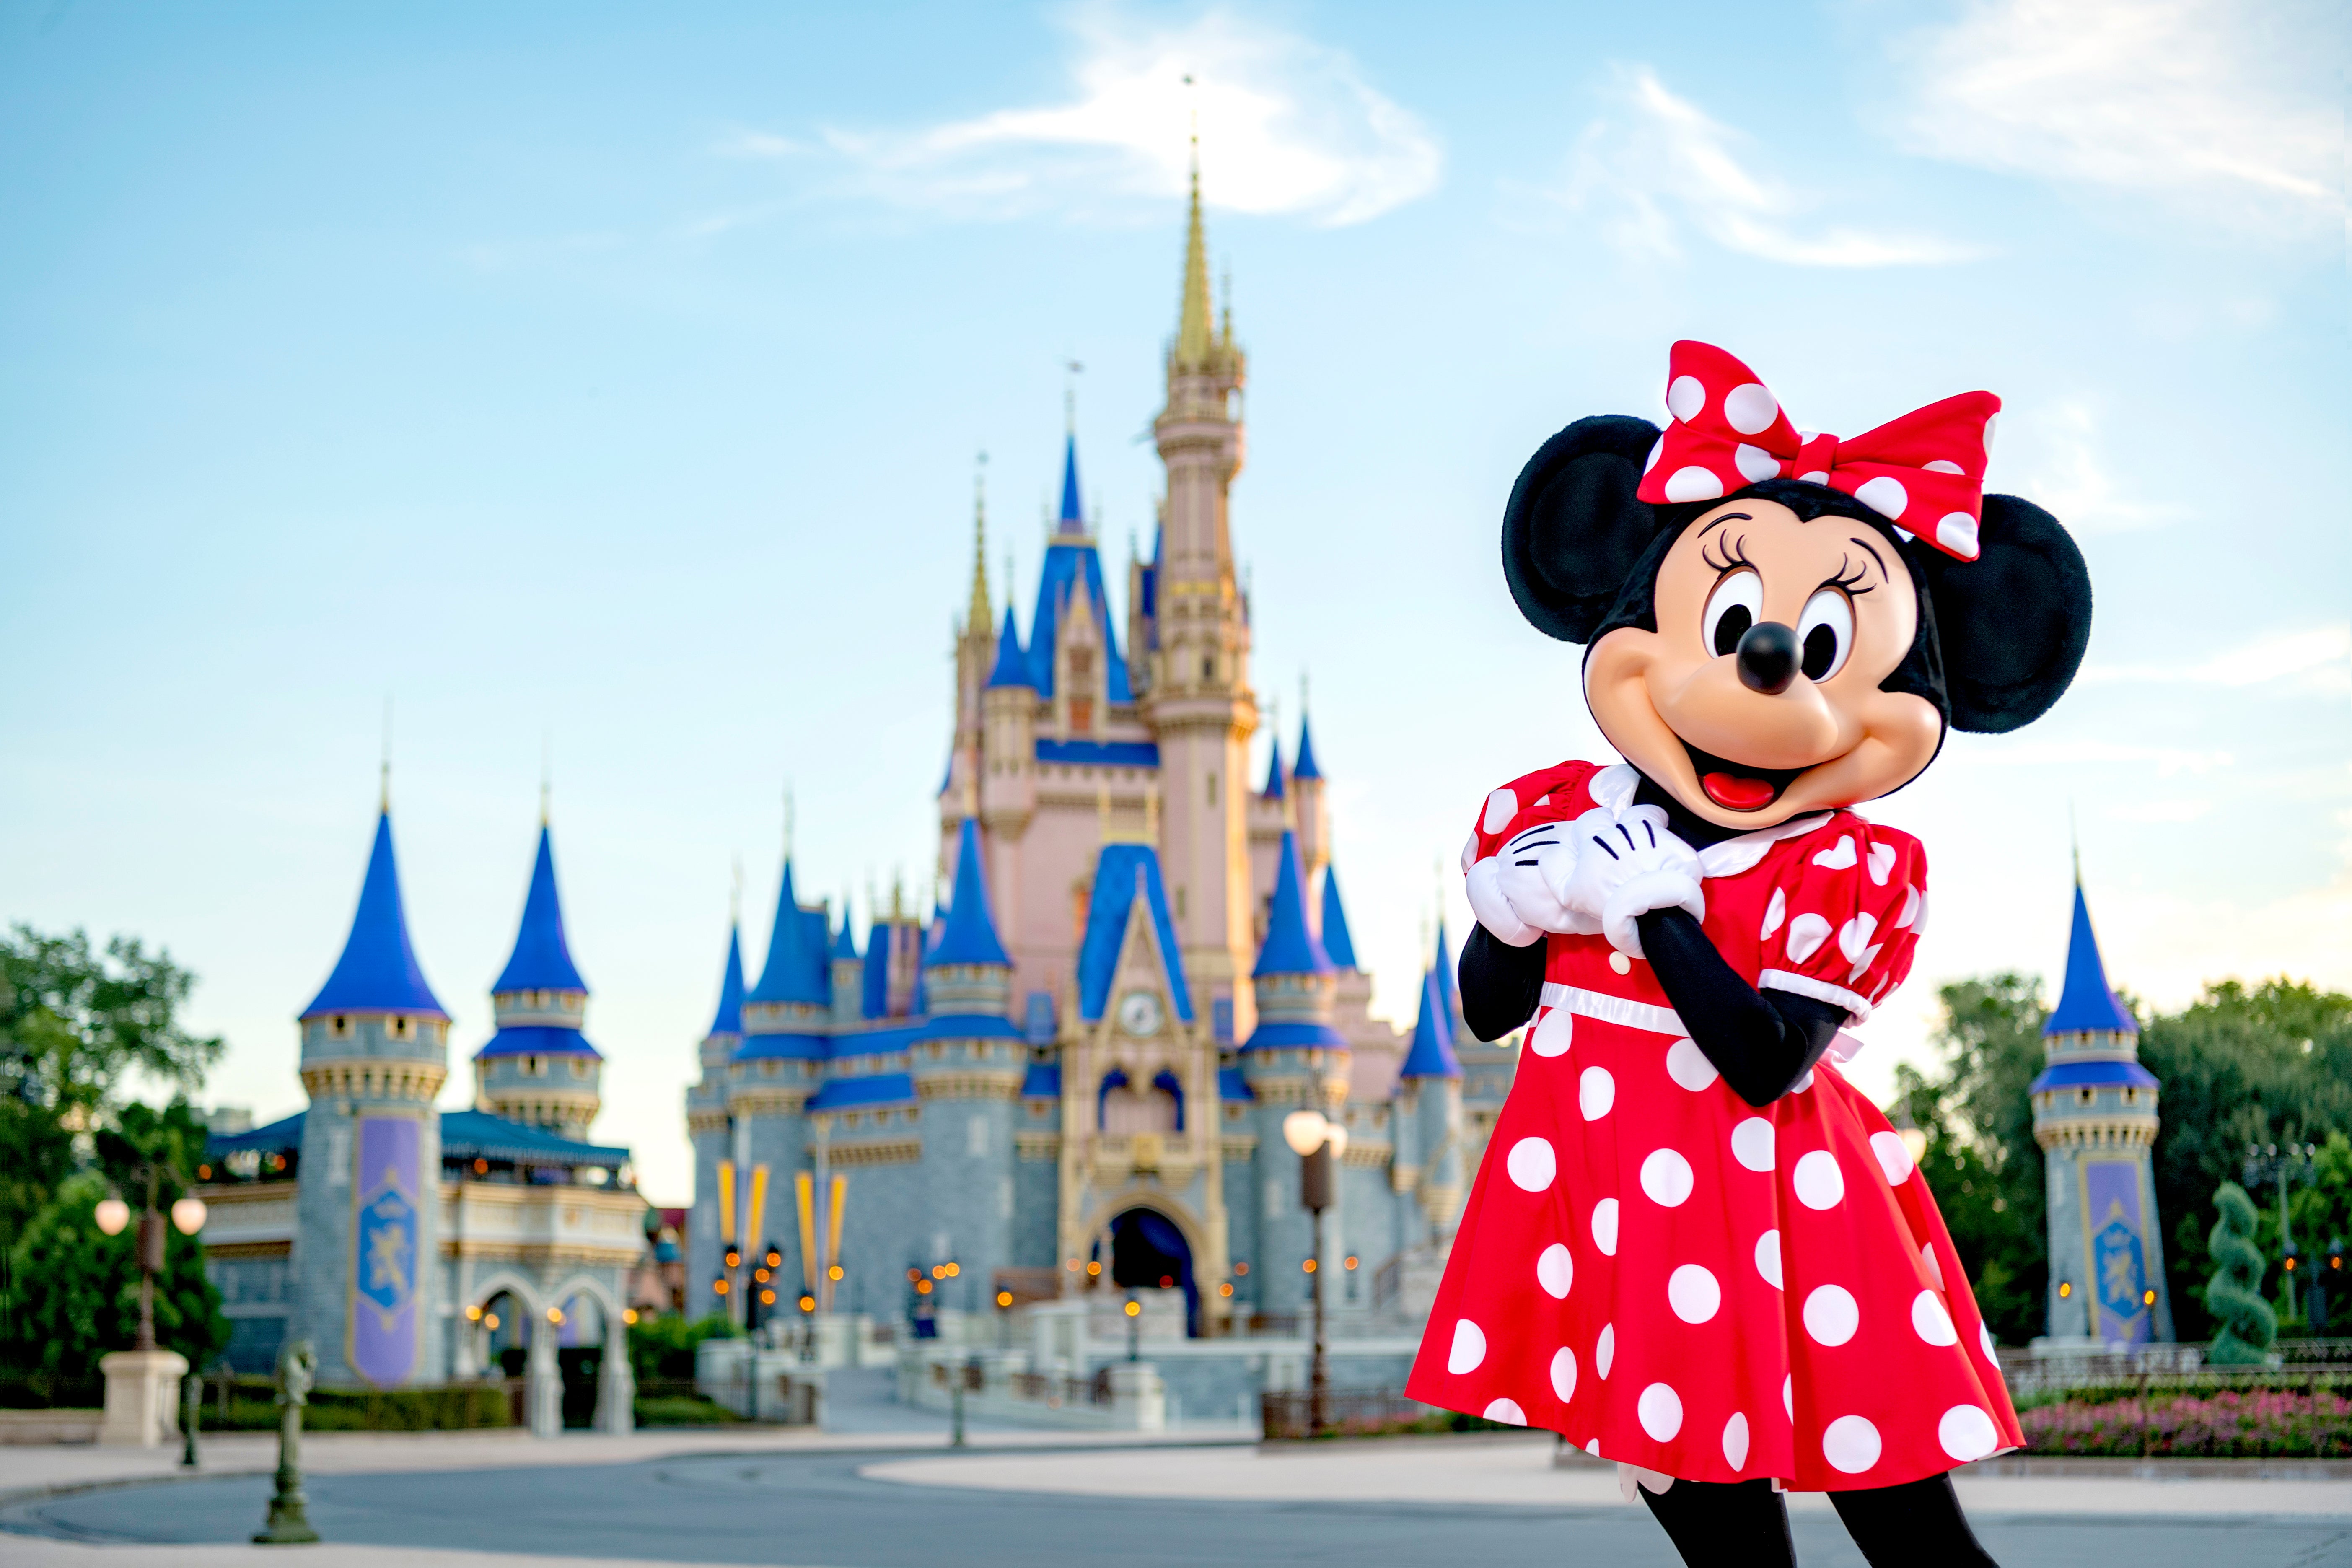 Meet Mickey, Minnie and friends at the Orlando parks